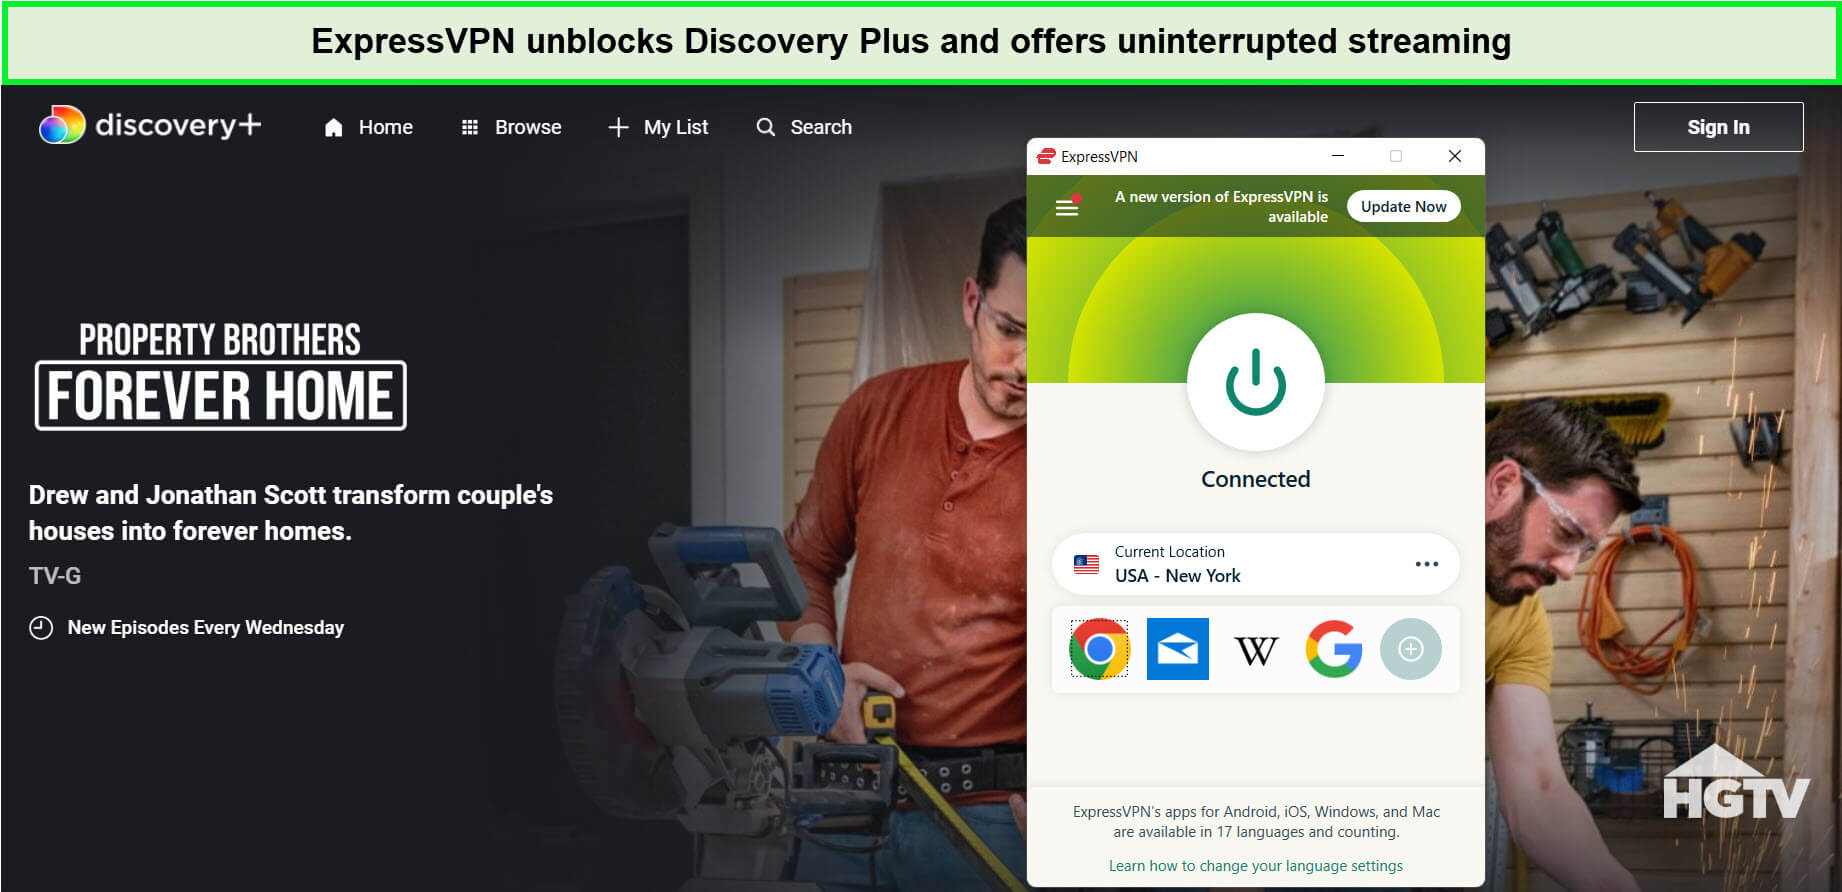 expressvpn-unblocks-property-brothers-forever-home-season-8-on-discovery-plus-in-Italy